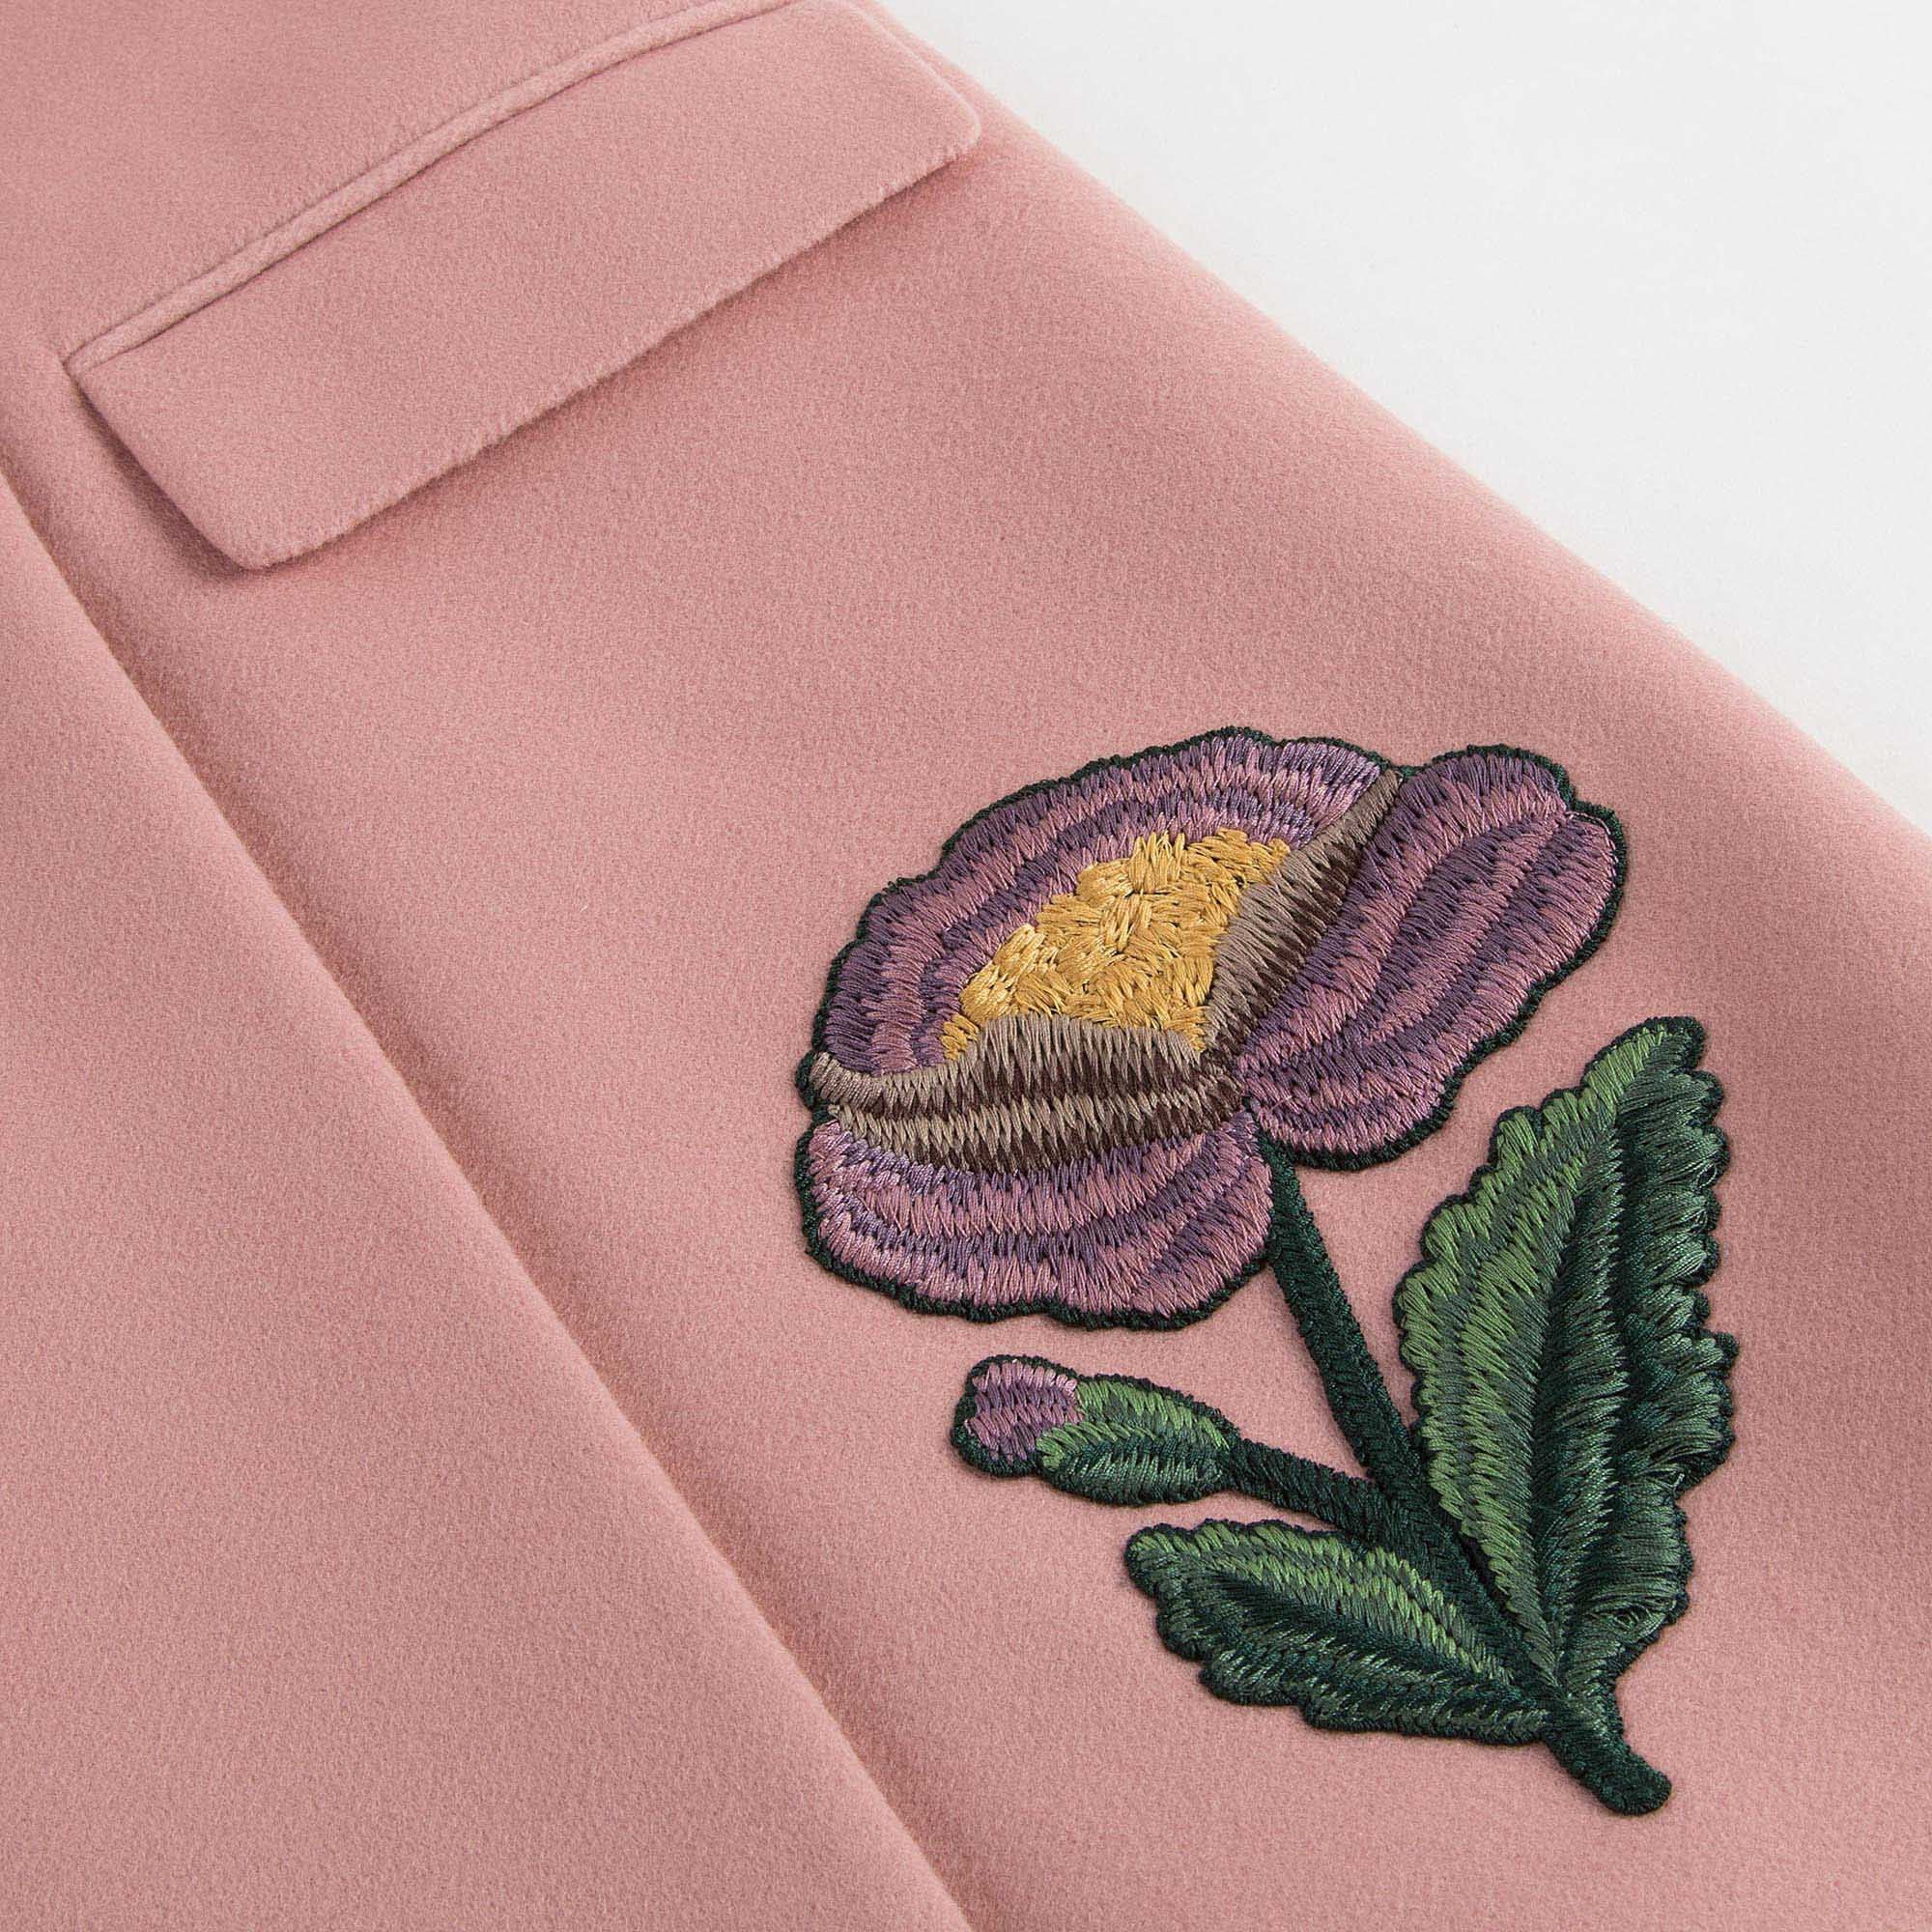 Girls Pink Wool Coat With Embroidered Flower Trims